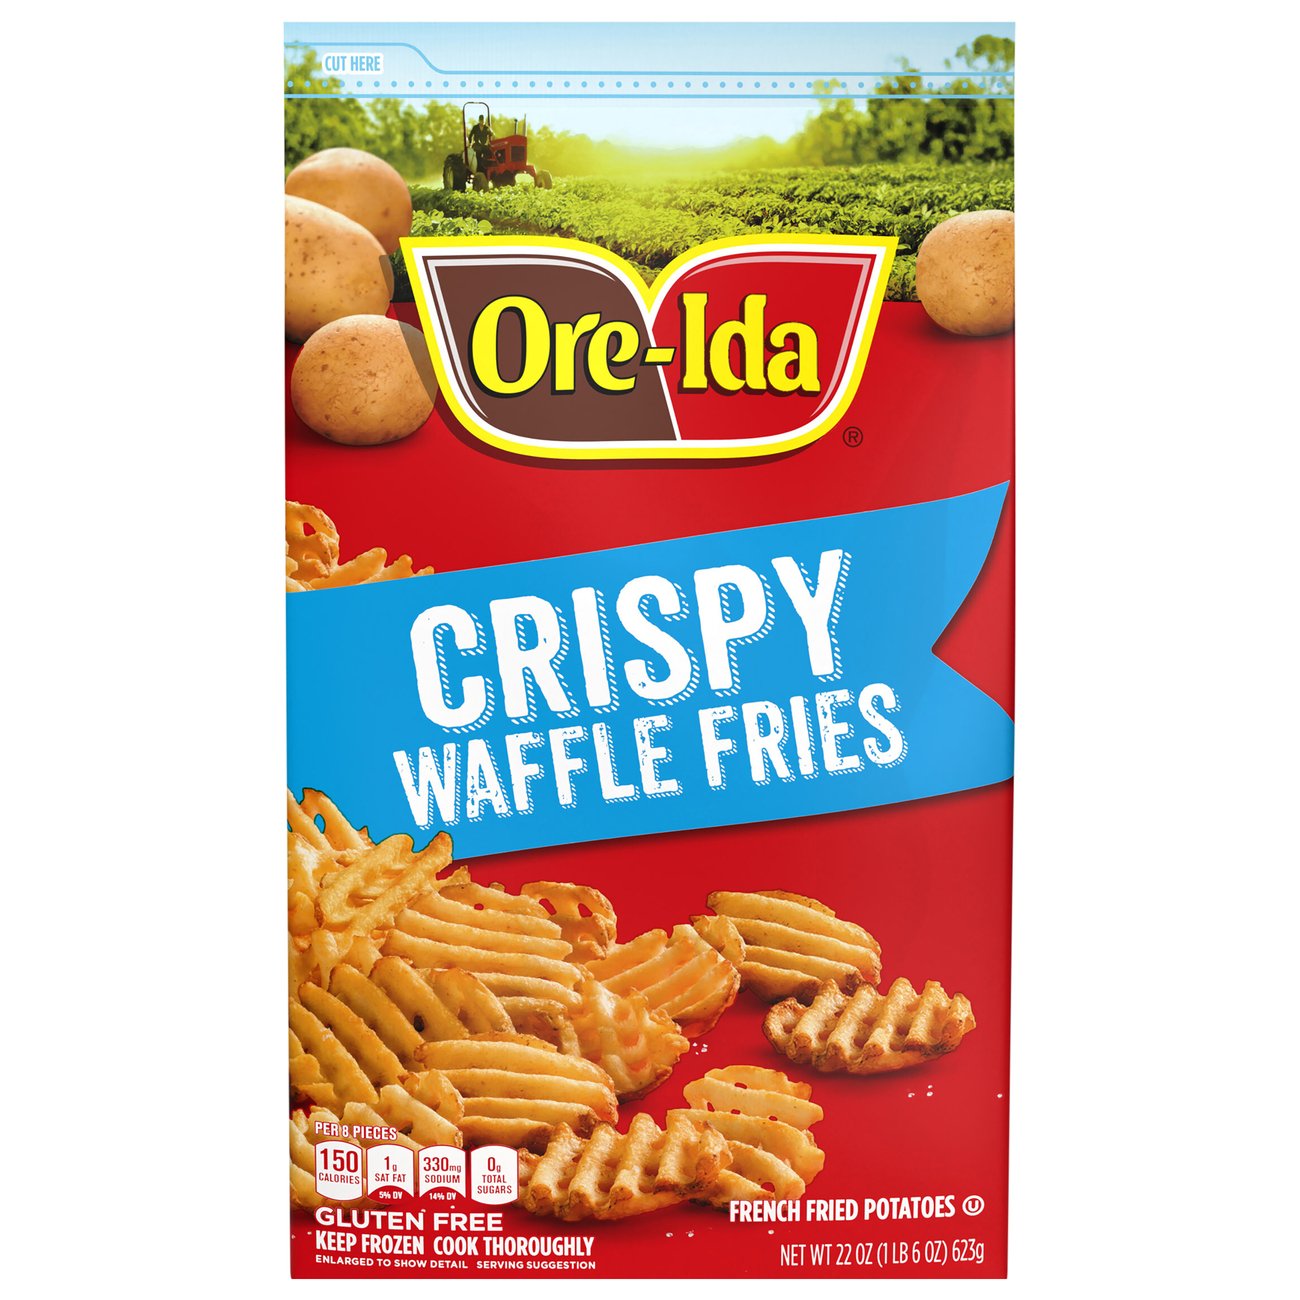 REVIEW: Chef Finds Best Frozen Waffle Fries to Buy at Grocery Store